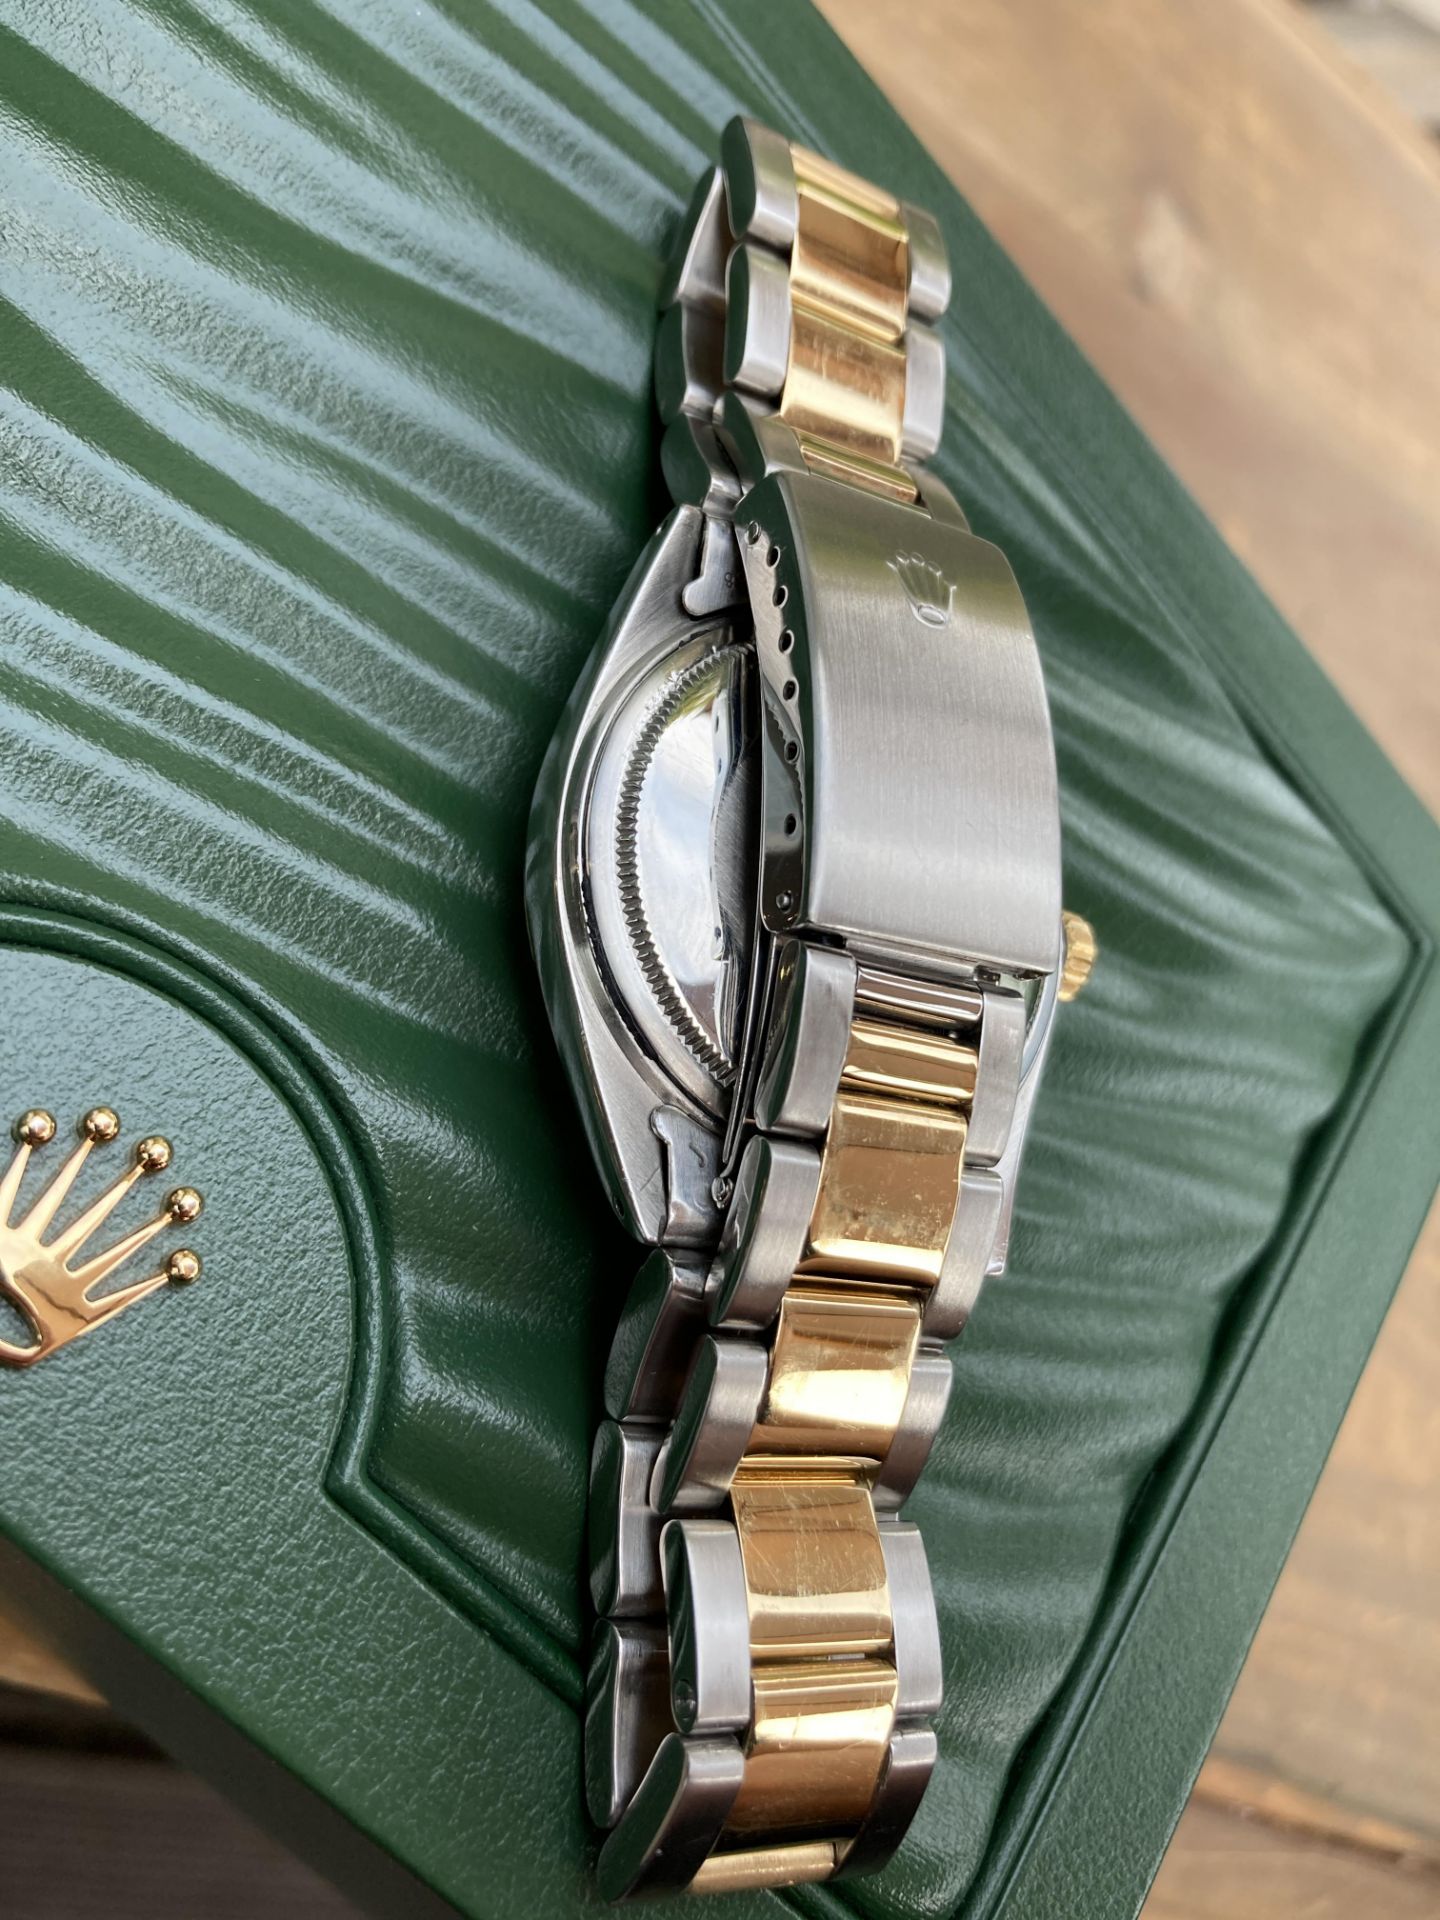 ROLEX DATEJUST 36MM, BIMETAL STAINLESS STEEL & 18CT YELLOW GOLD, CHAMPAGNE DIAL - BOX NOT INCLUDED - Image 11 of 11